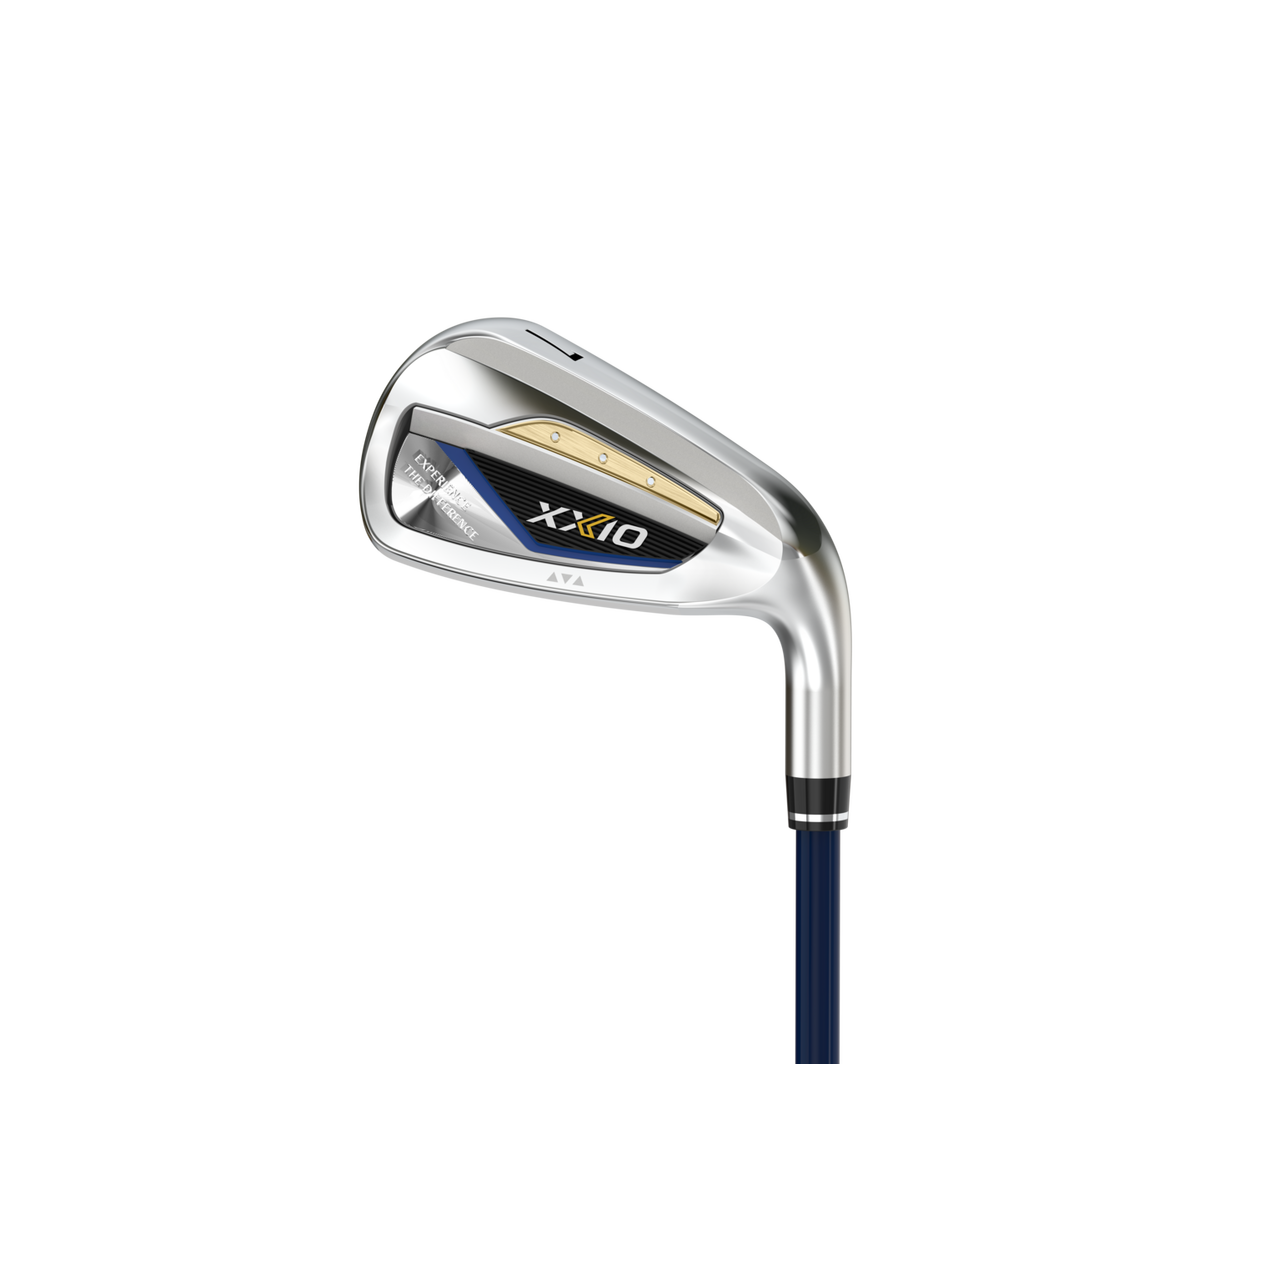 13 6-PW Iron Set with Graphite Shafts